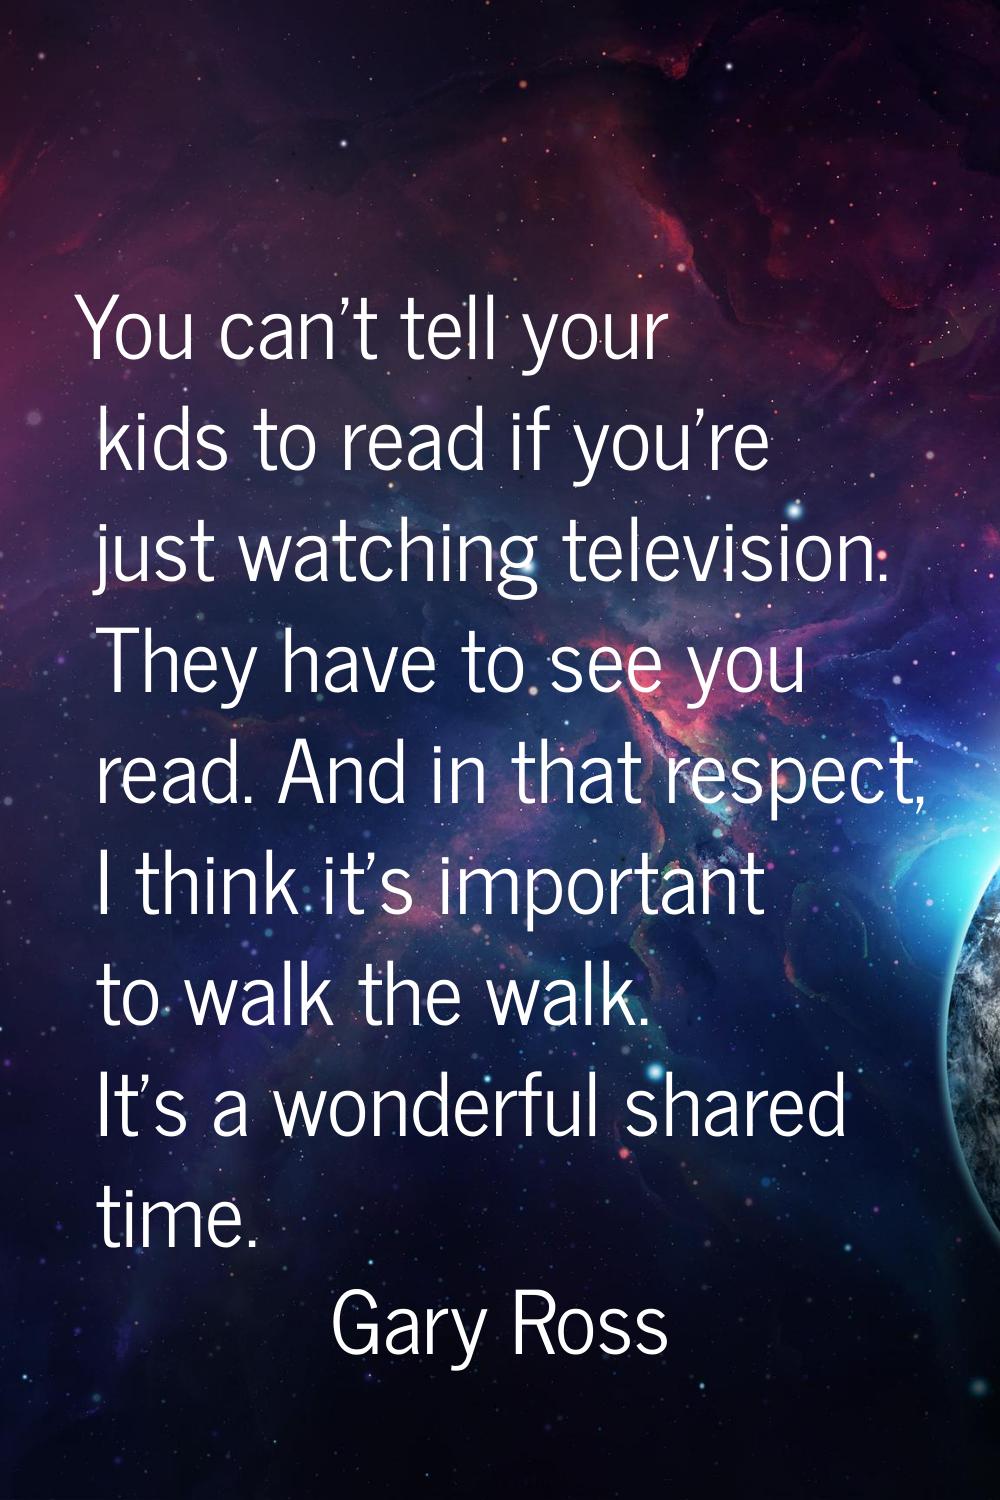 You can't tell your kids to read if you're just watching television. They have to see you read. And